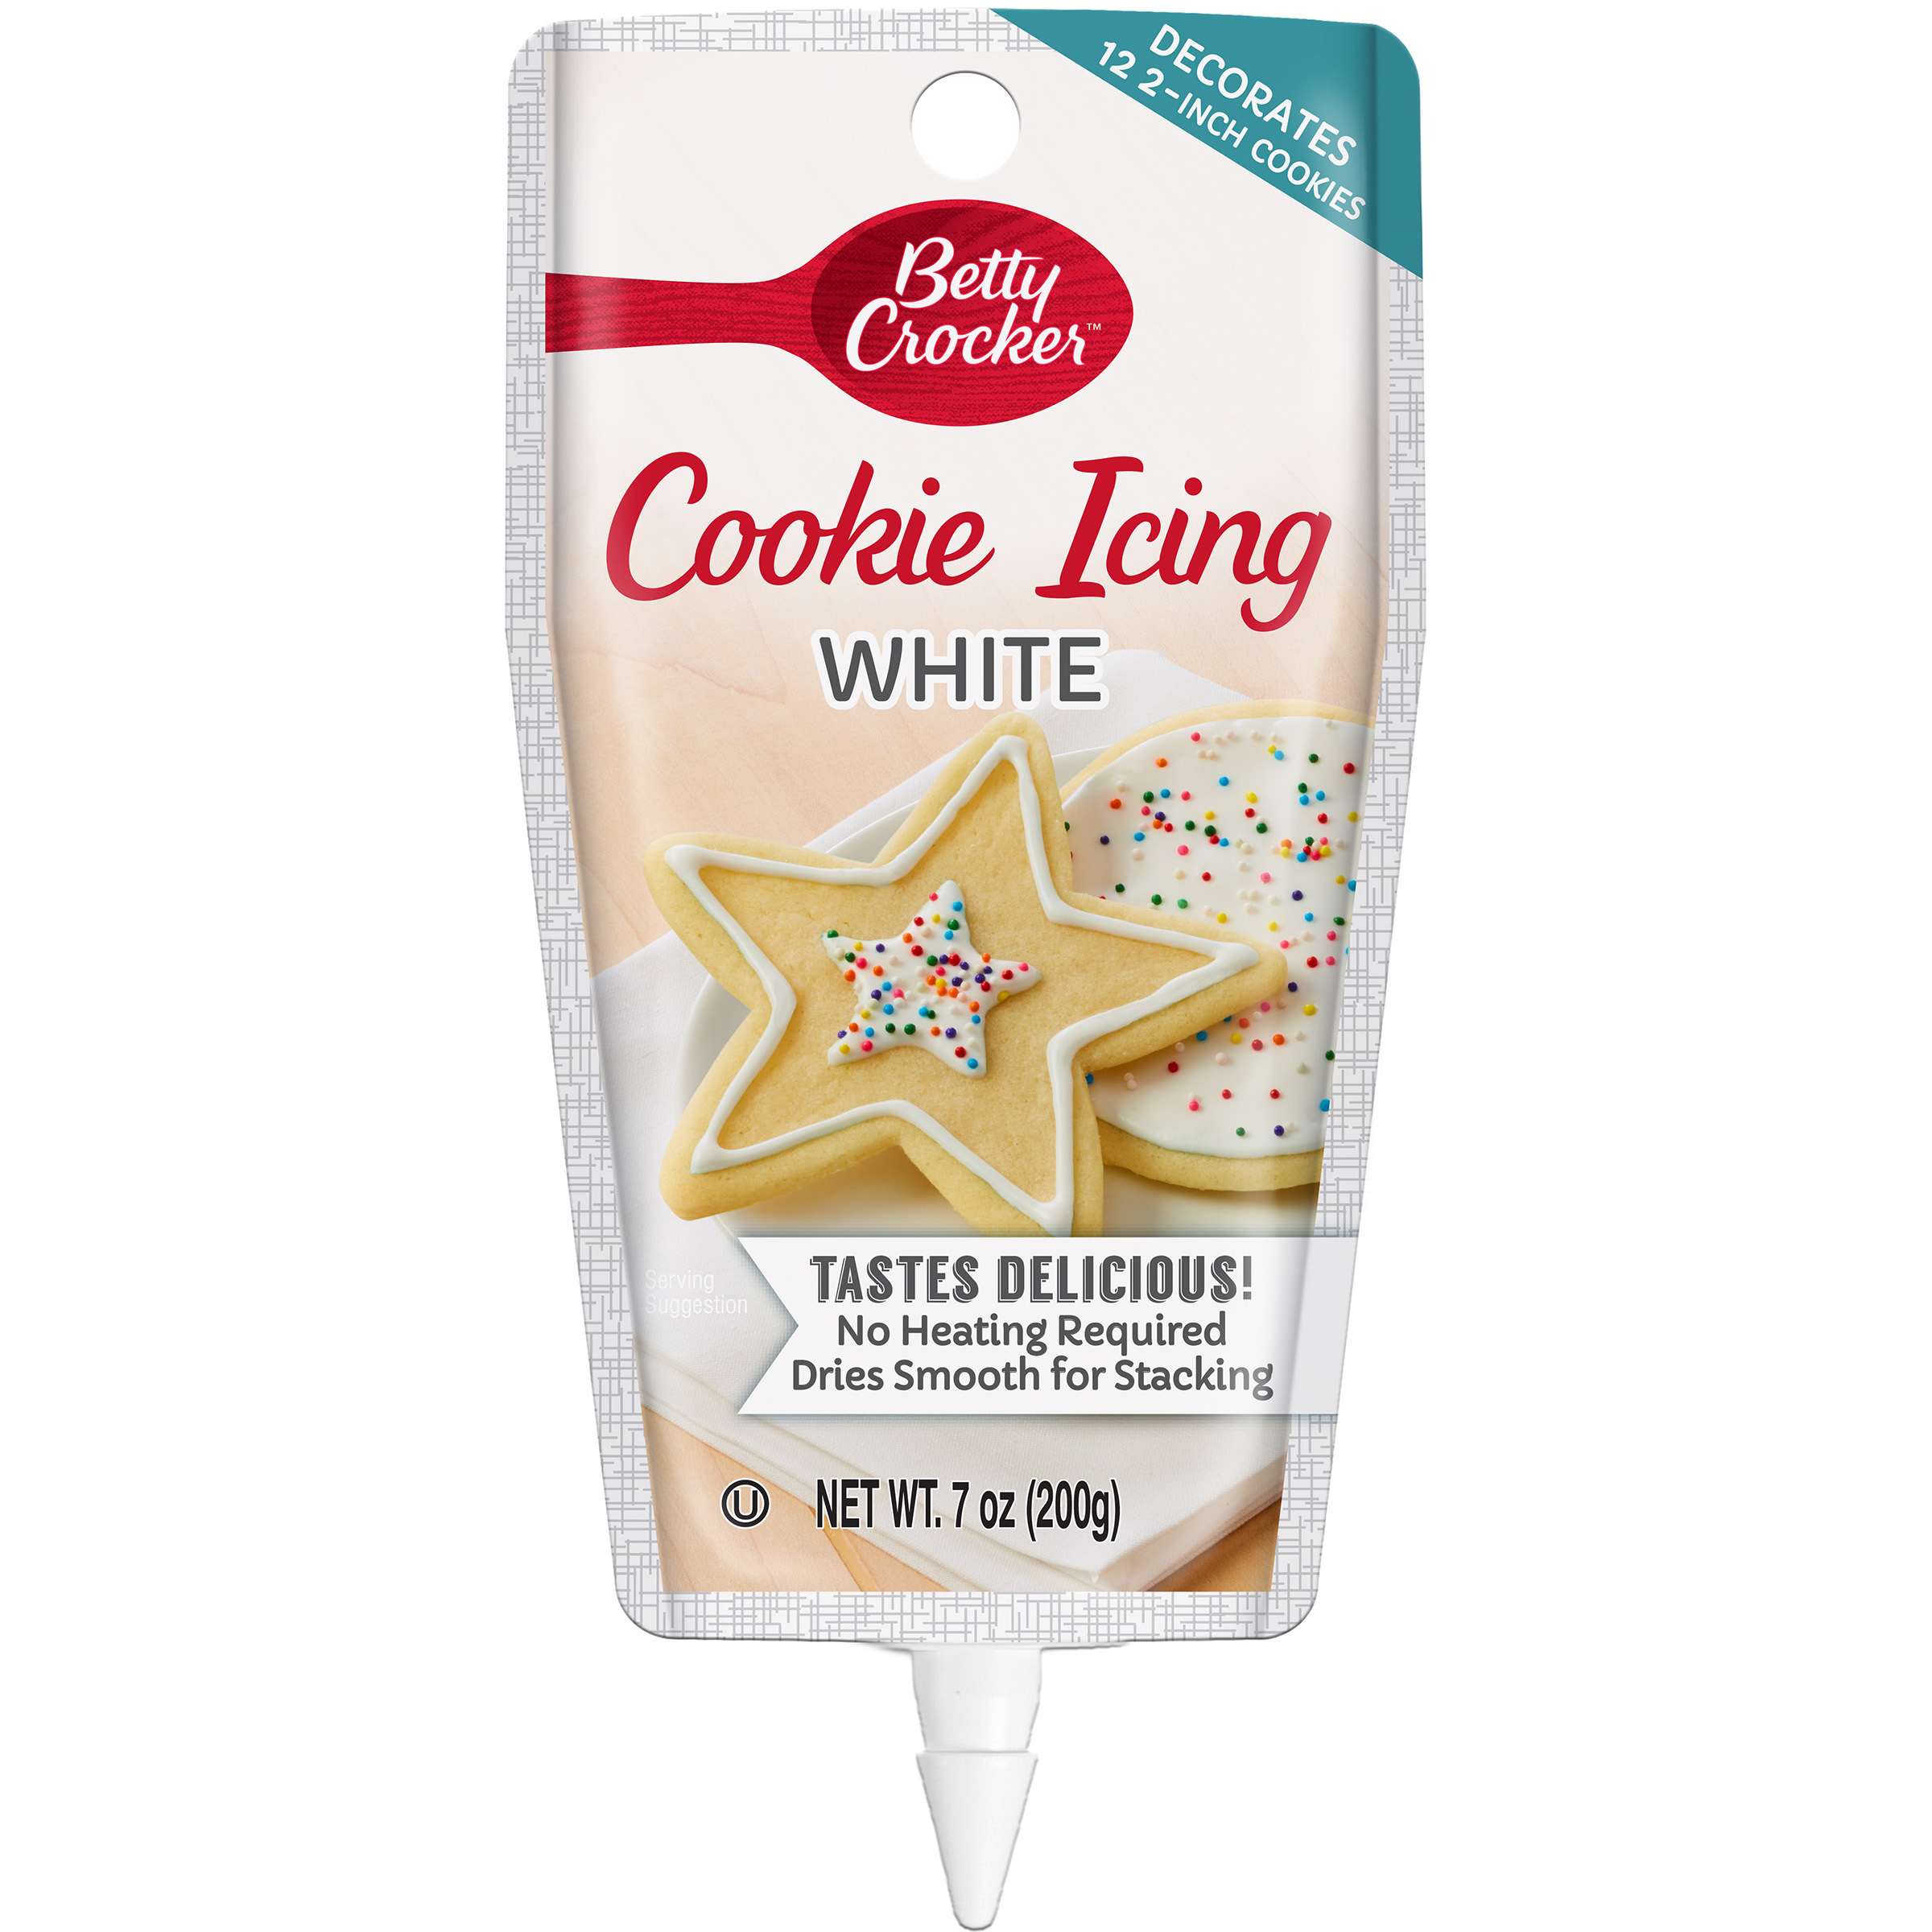 Betty Crocker White Cookie Decorating Icing, Vanilla Flavor, 7 Ounce Pouch - image 1 of 6